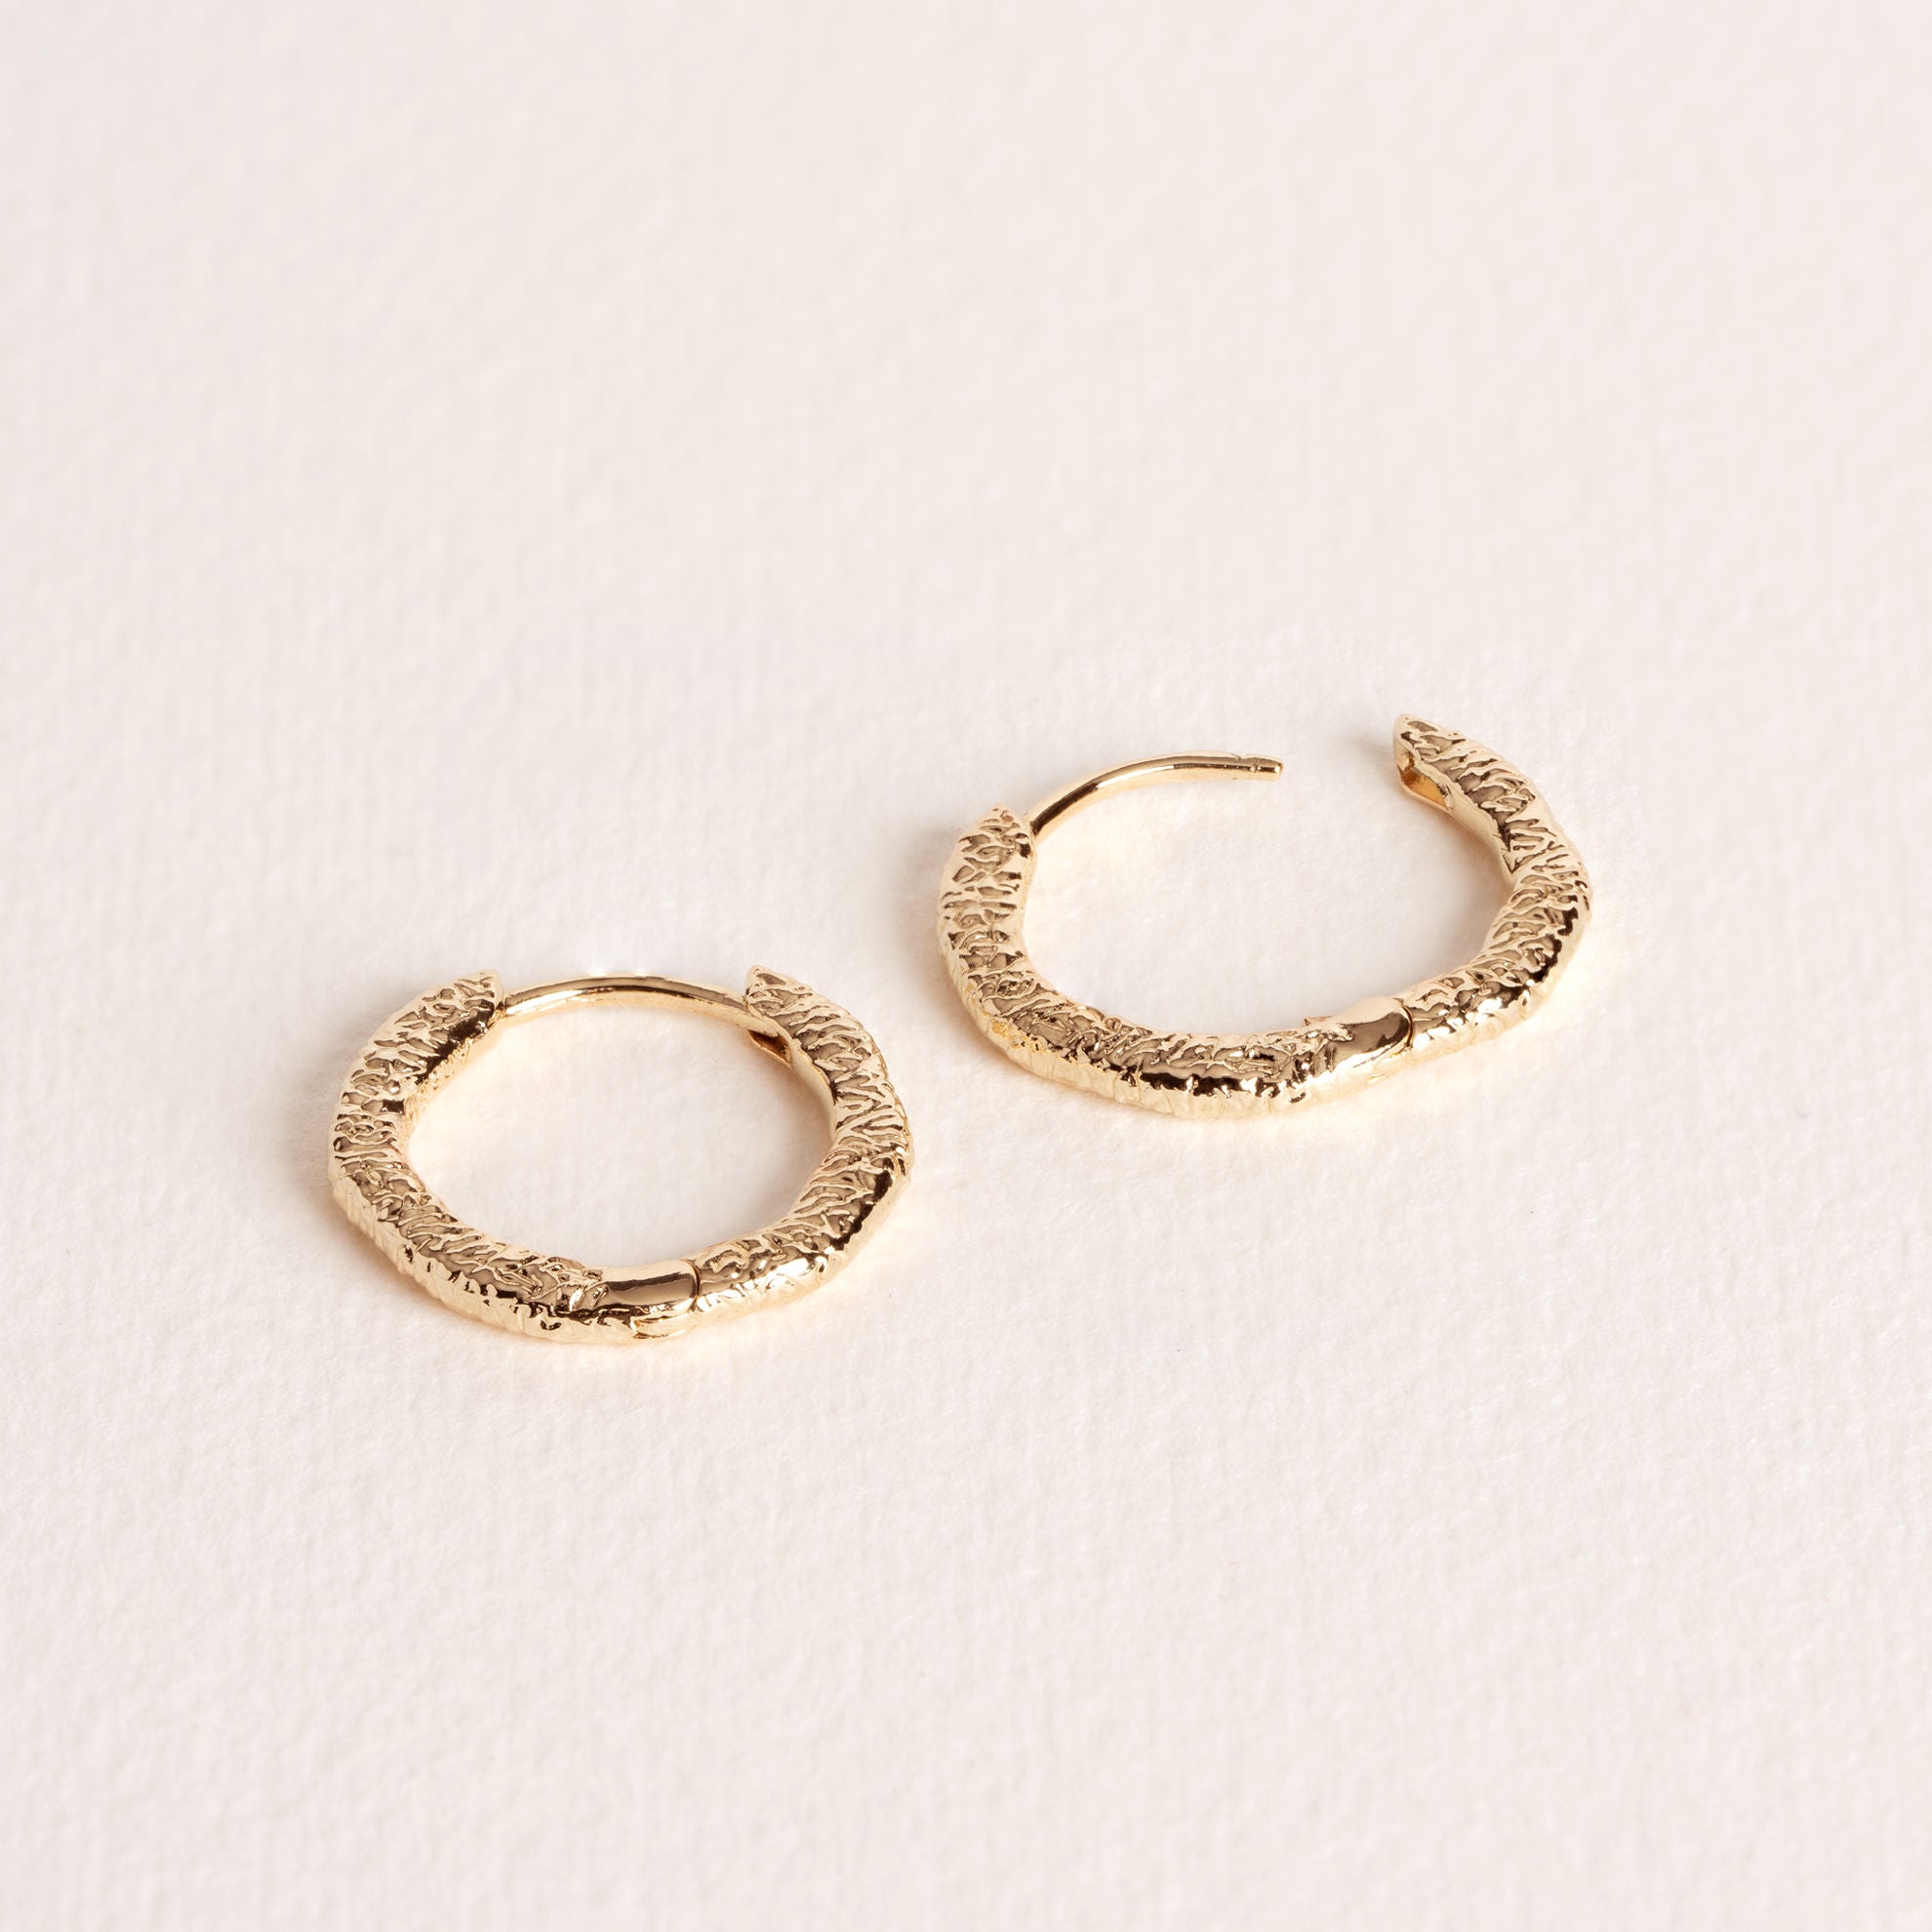 Angel - Round - 18mm - Gold Plated Hoop Earrings - Ana et Cha